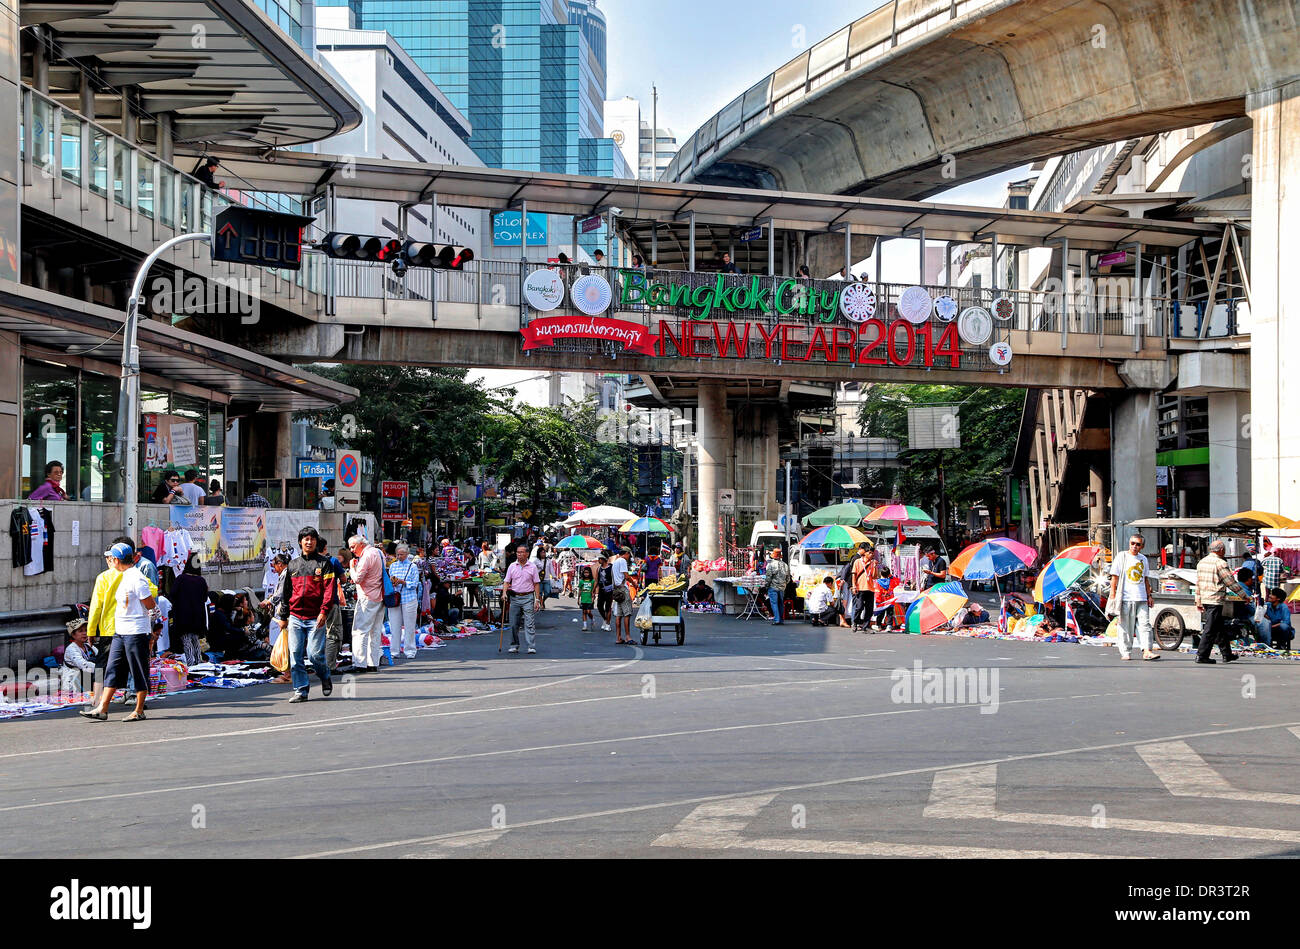 Bangkok, Thailand. 19th Jan 2014. Location in these images is at the normally busy Silom-Saladaeng intersection in one of Bangkoks key commercial districts. Tens of thousands of protesters have disrupted traffic at major intersections and marched on government offices in Thailand's large and hectic capital city this week. The protests, dubbed 'Bangkok Shutdown,' had begun Monday 13th January without serious incident.  The rallies are orchestrated by the People's Democratic Reform Committee (PDRC) protest group, led by Suthep Thaugsuban, a former deputy prime minister for the opposition Democ  Stock Photo